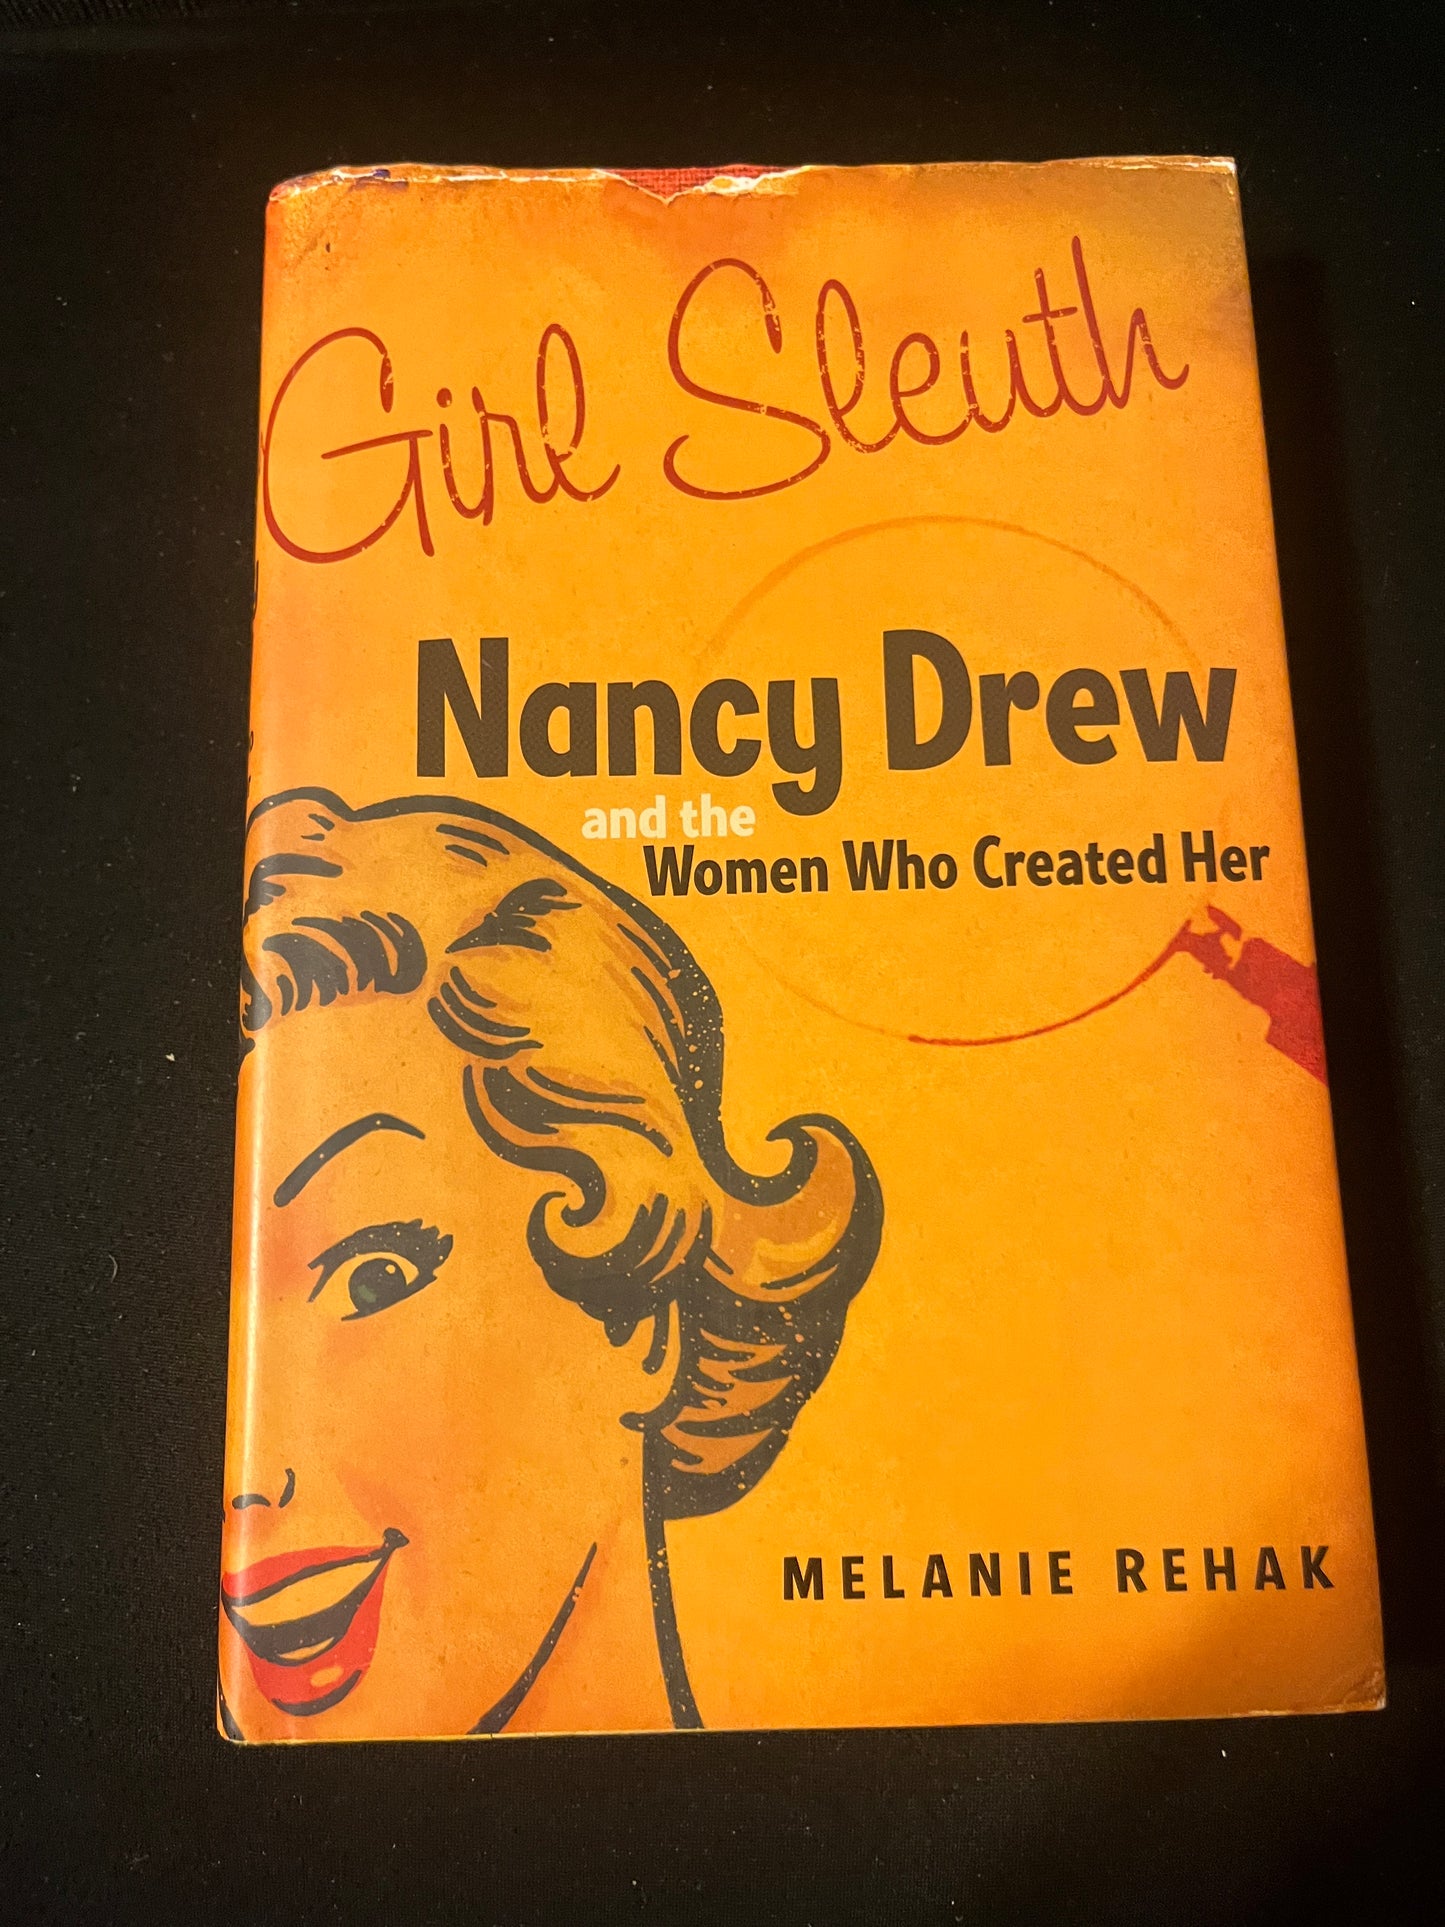 GIRL SLEUTH: NANCY DREW AND THE WOMEN WHO CREATED HER by Melanie Rehak